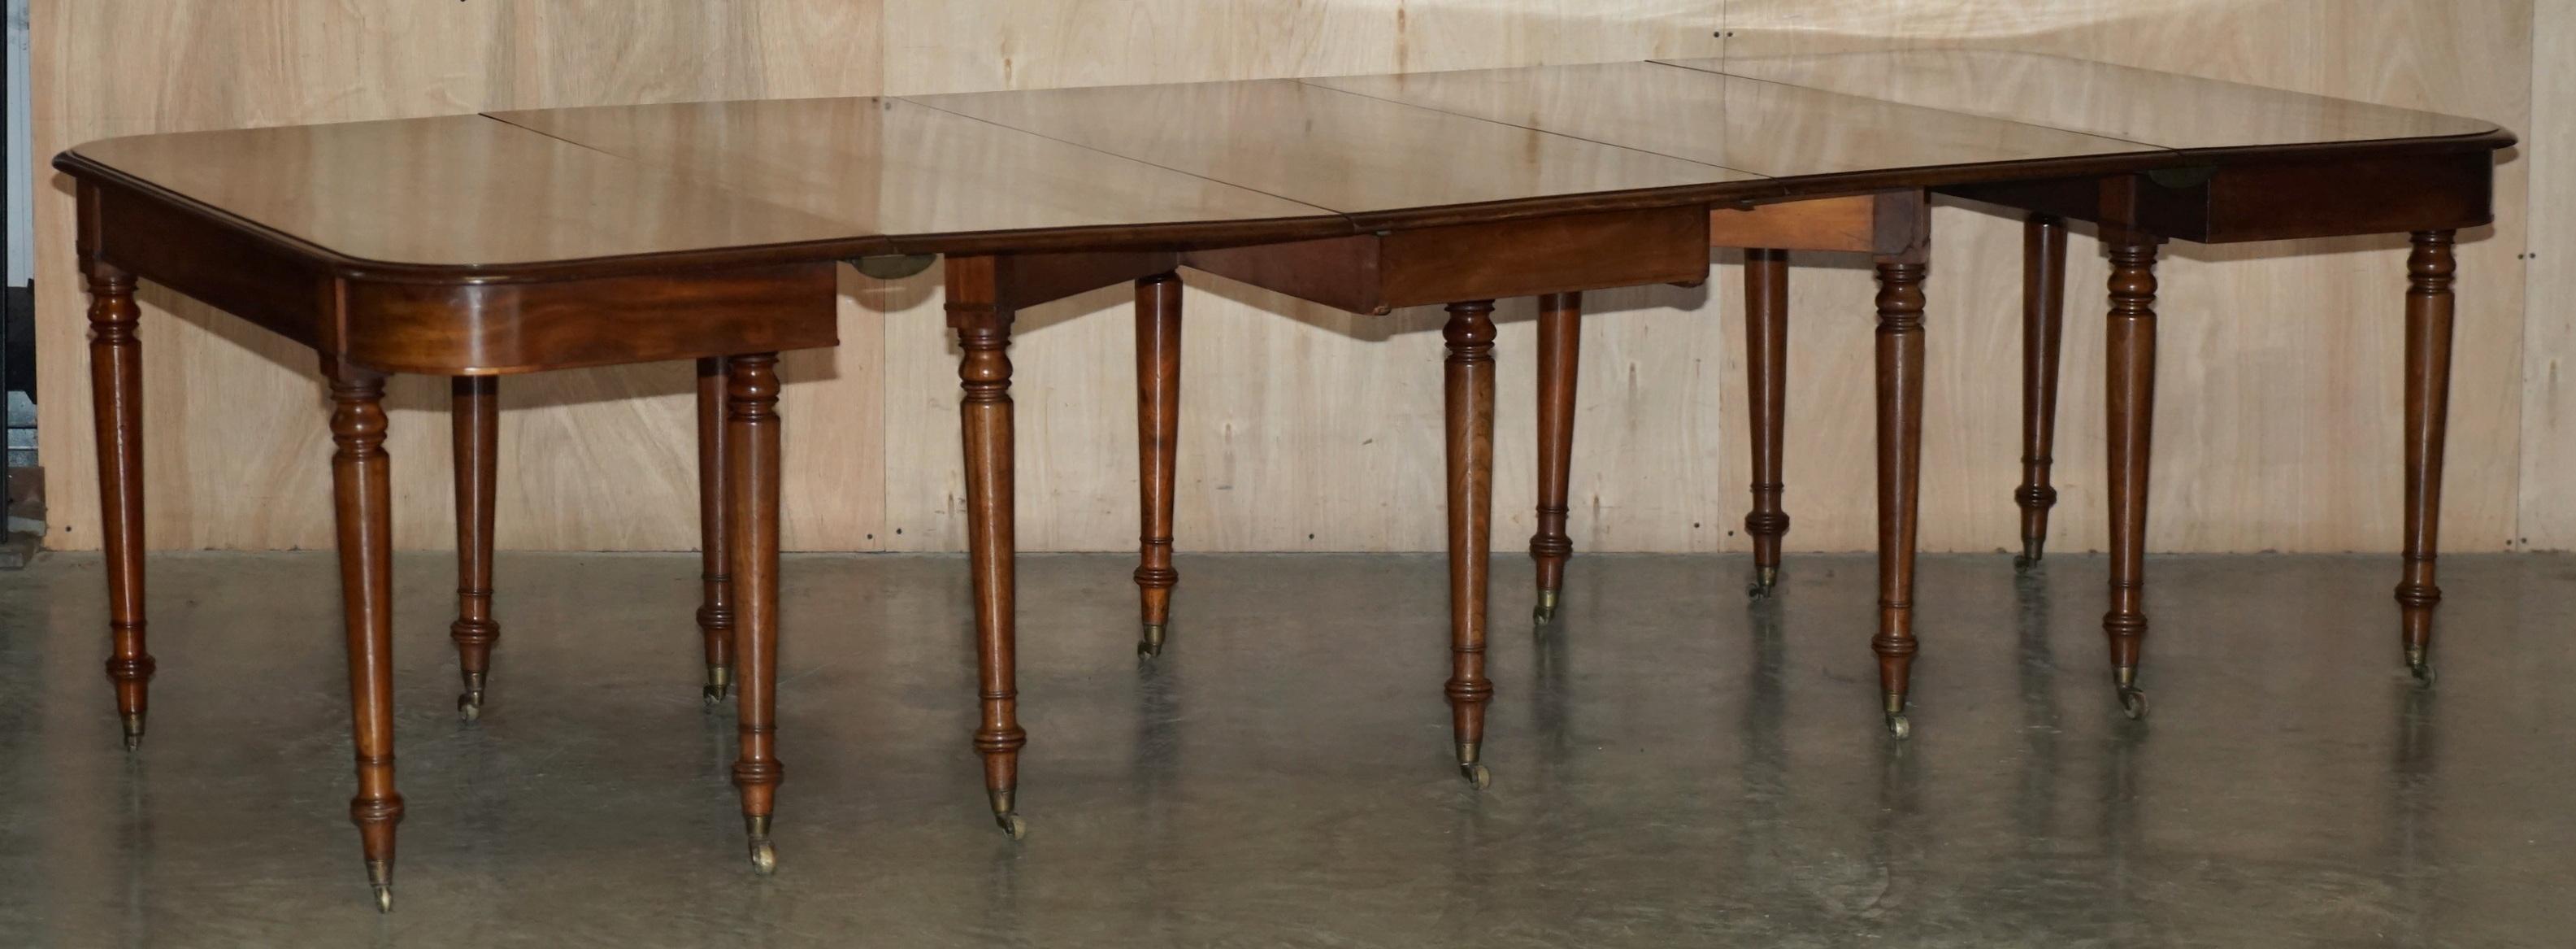 Antique George III 1820 Flamed Hardwood Fully Restored Extending Dining Table For Sale 7